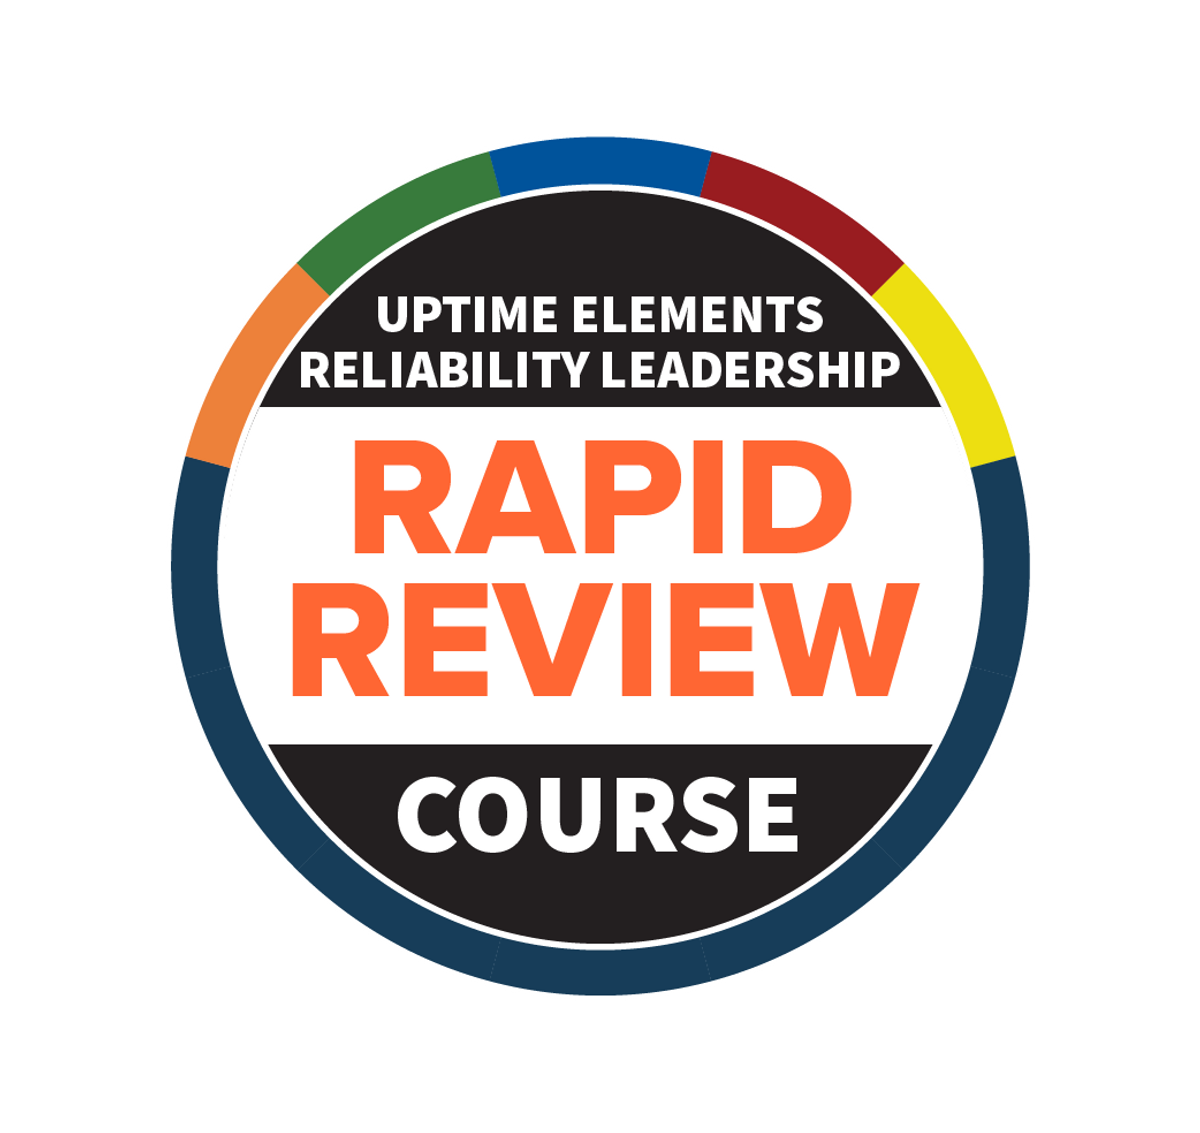 Uptime Elements Reliability Leadership Rapid Review Course with Spanish Translation